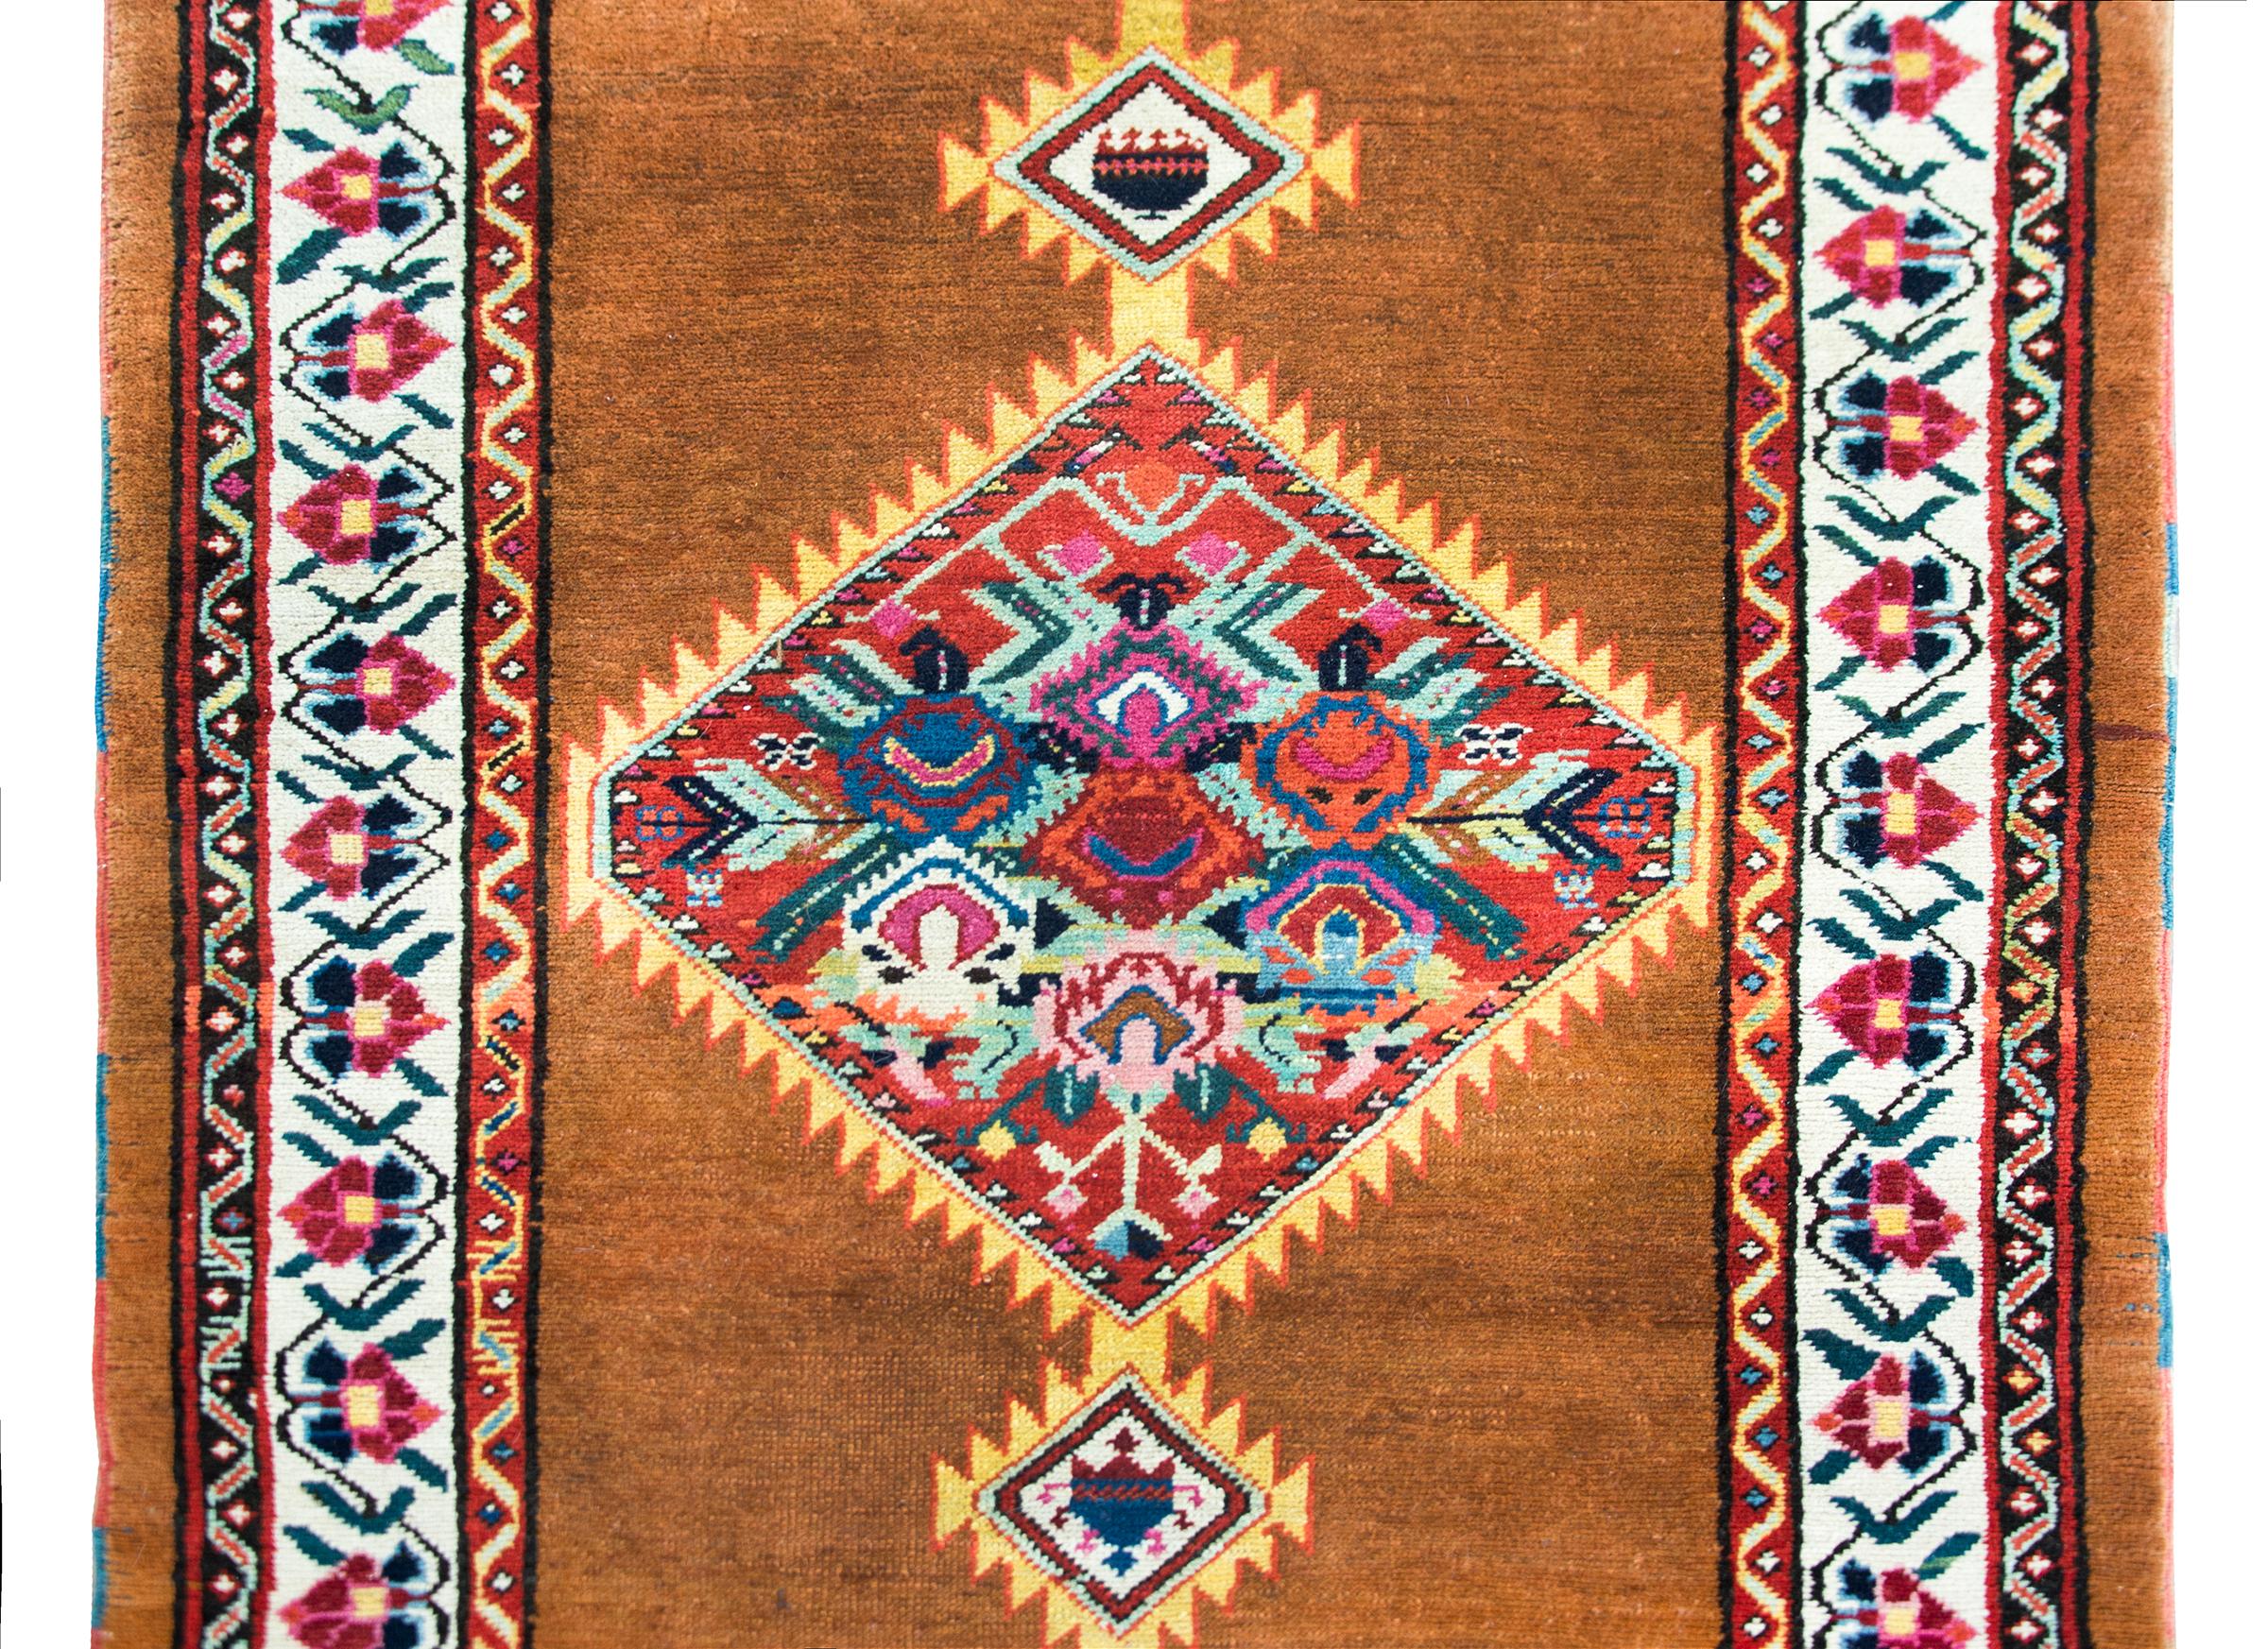 An incredible and stylish early 20th century Persian Serab runner with three large diamond medallions each woven with large-scale stylized flower clusters woven in myriad bold colors and all set against a natural camel wool ground.  The border is